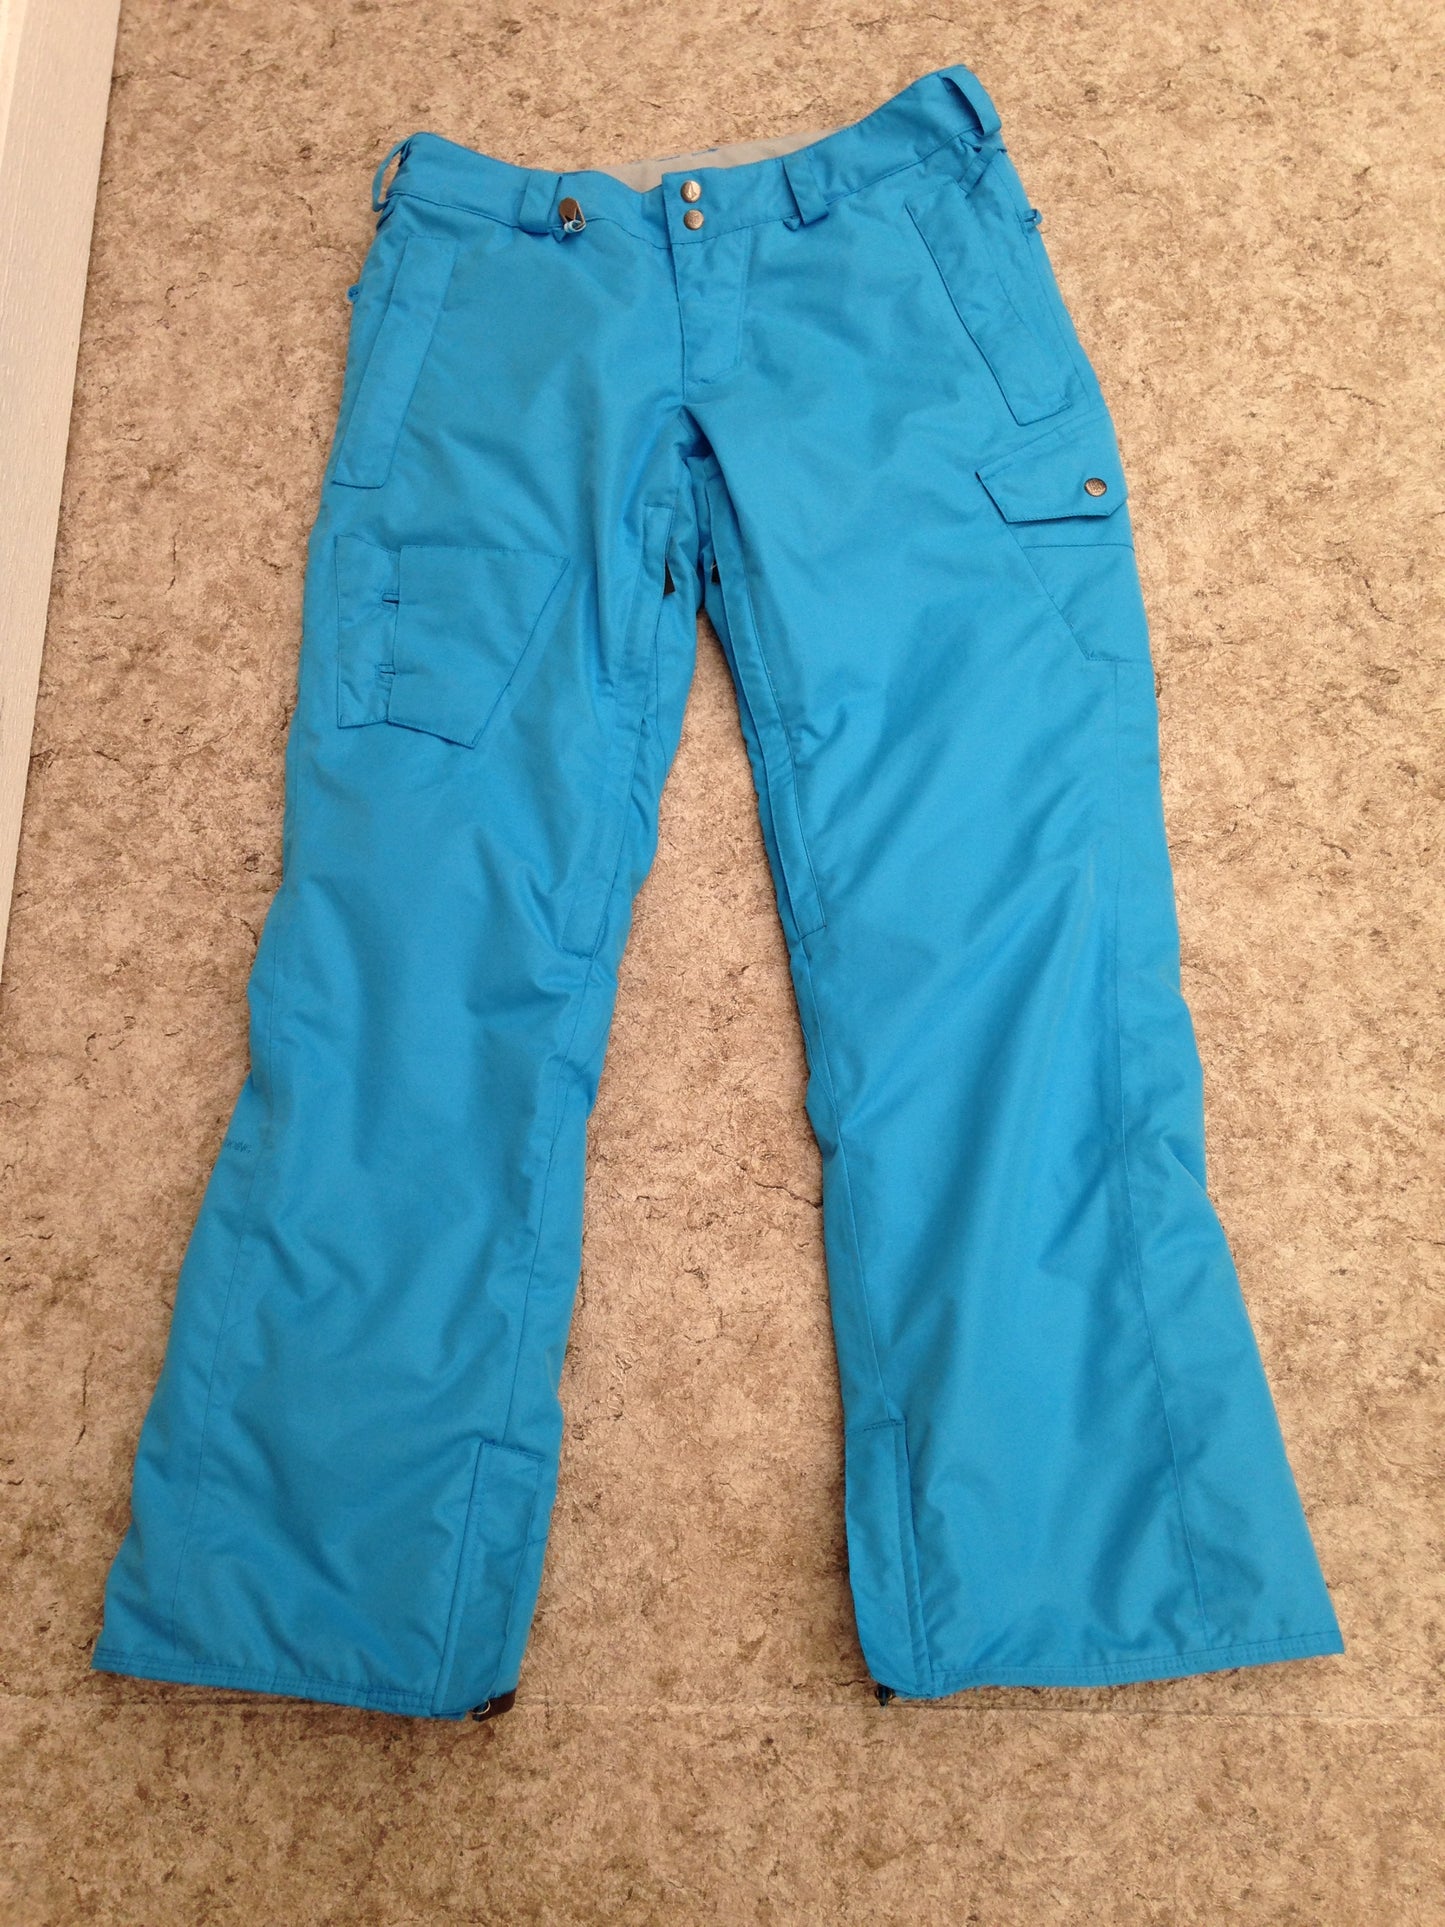 Snow Pants Men's Size Large Volcom Ocean Blue Insulated Snowboarding New Demo Model